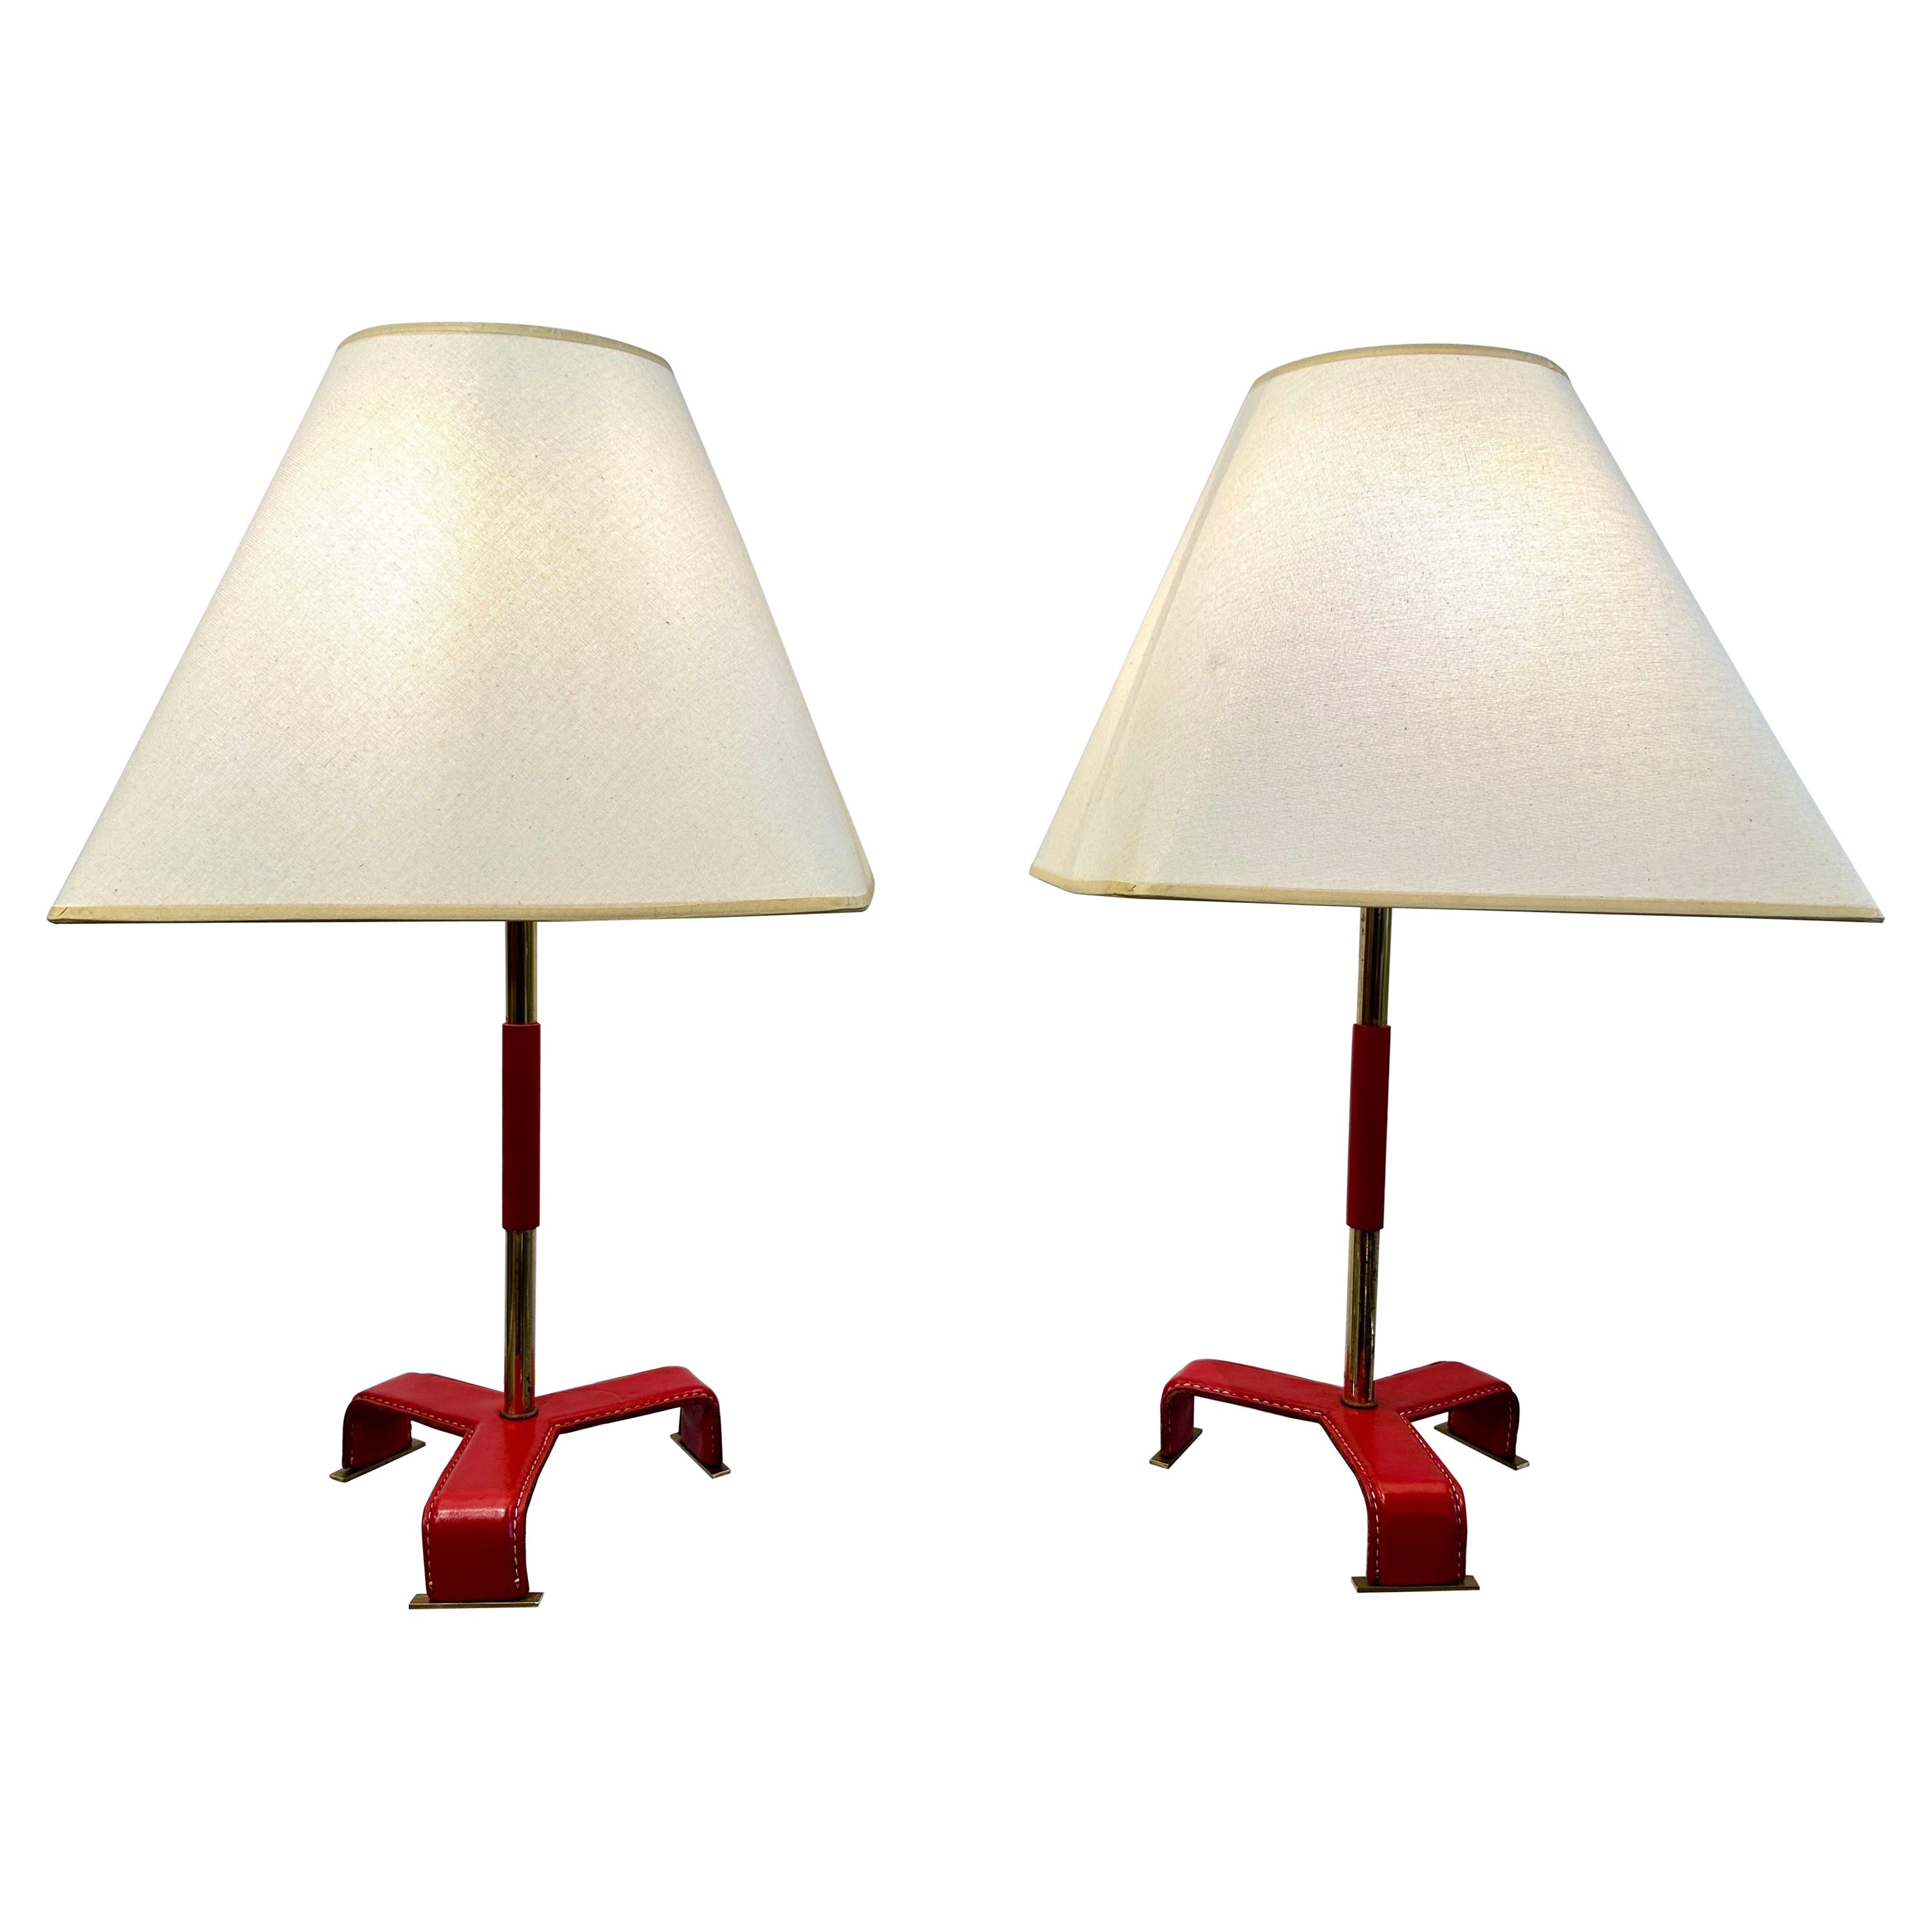 Vintage Pair of Jacques Adnet style Red Stitched Leather Table Lamps, 1950's For Sale